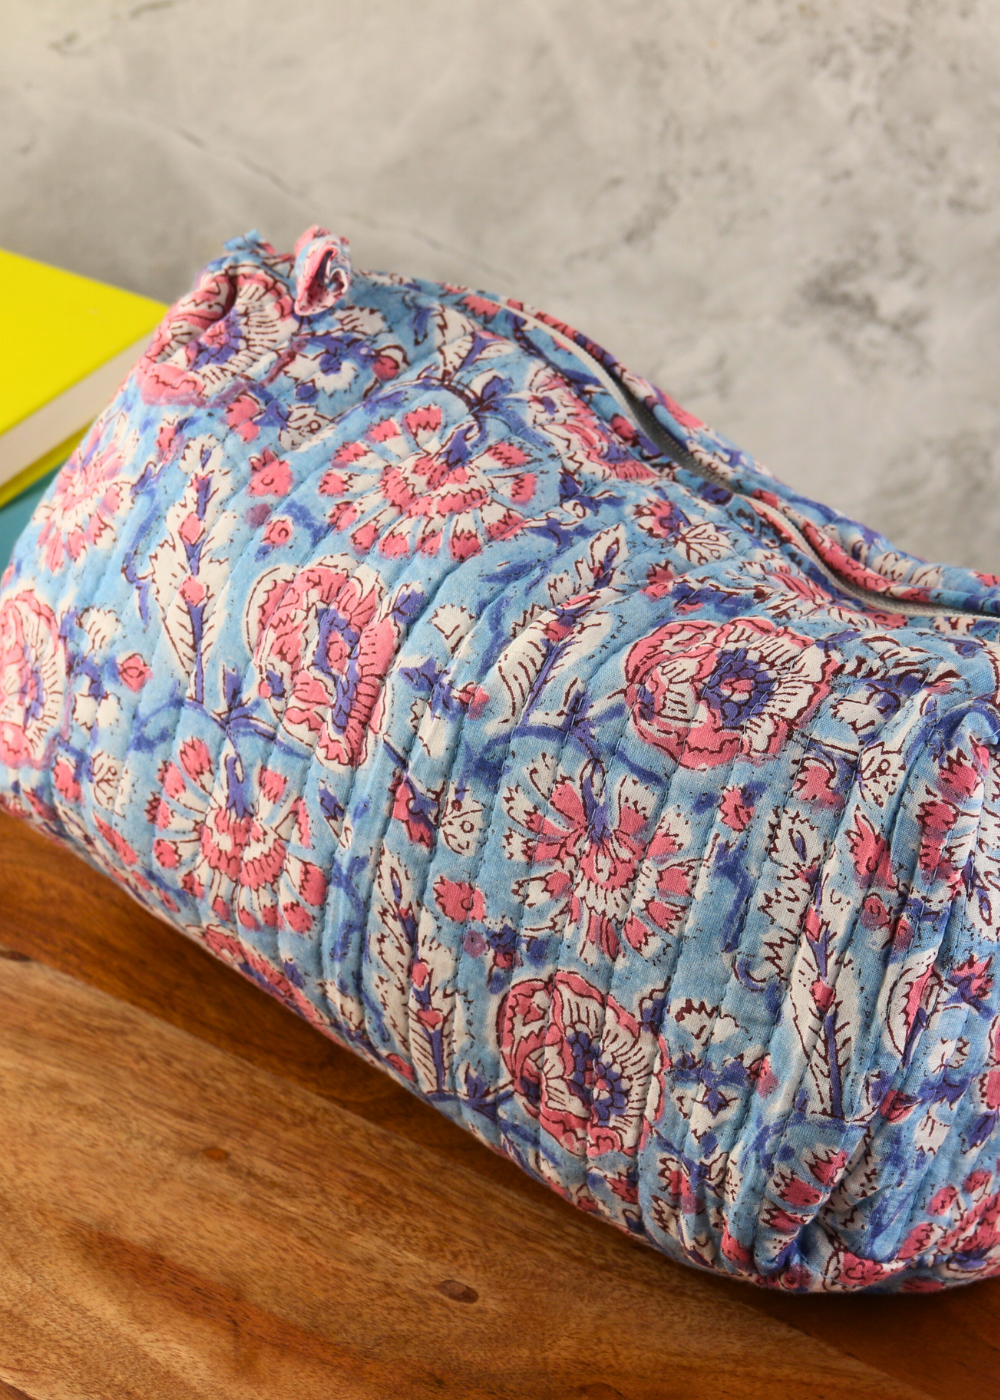 Medium size block printed toiletry bag on a wooden surface